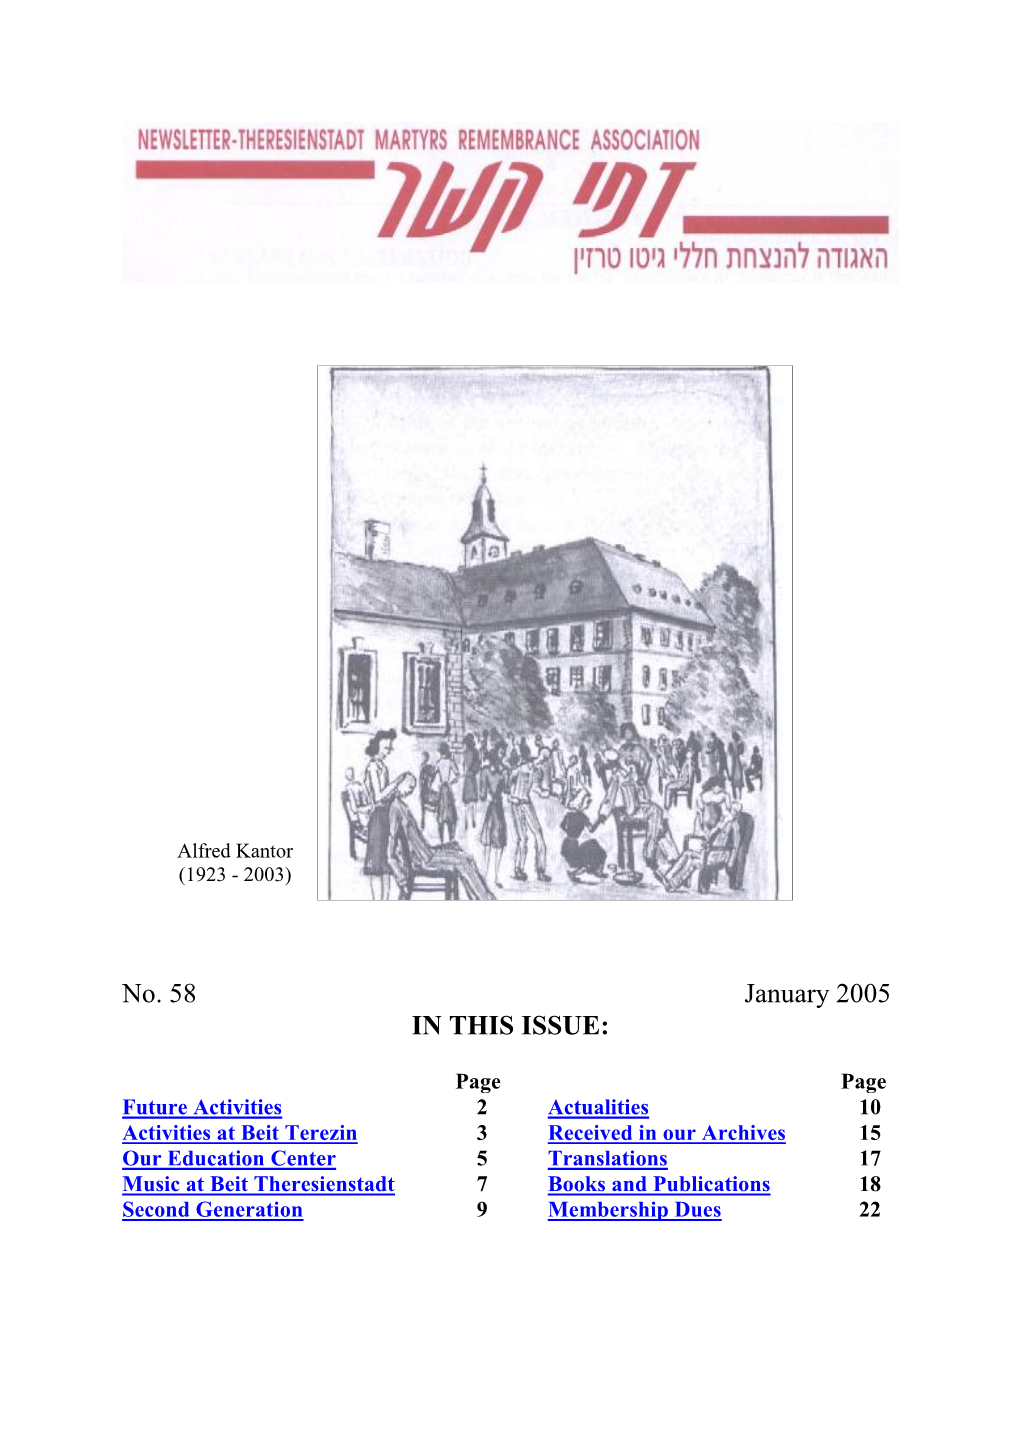 No. 58 January 2005 in THIS ISSUE